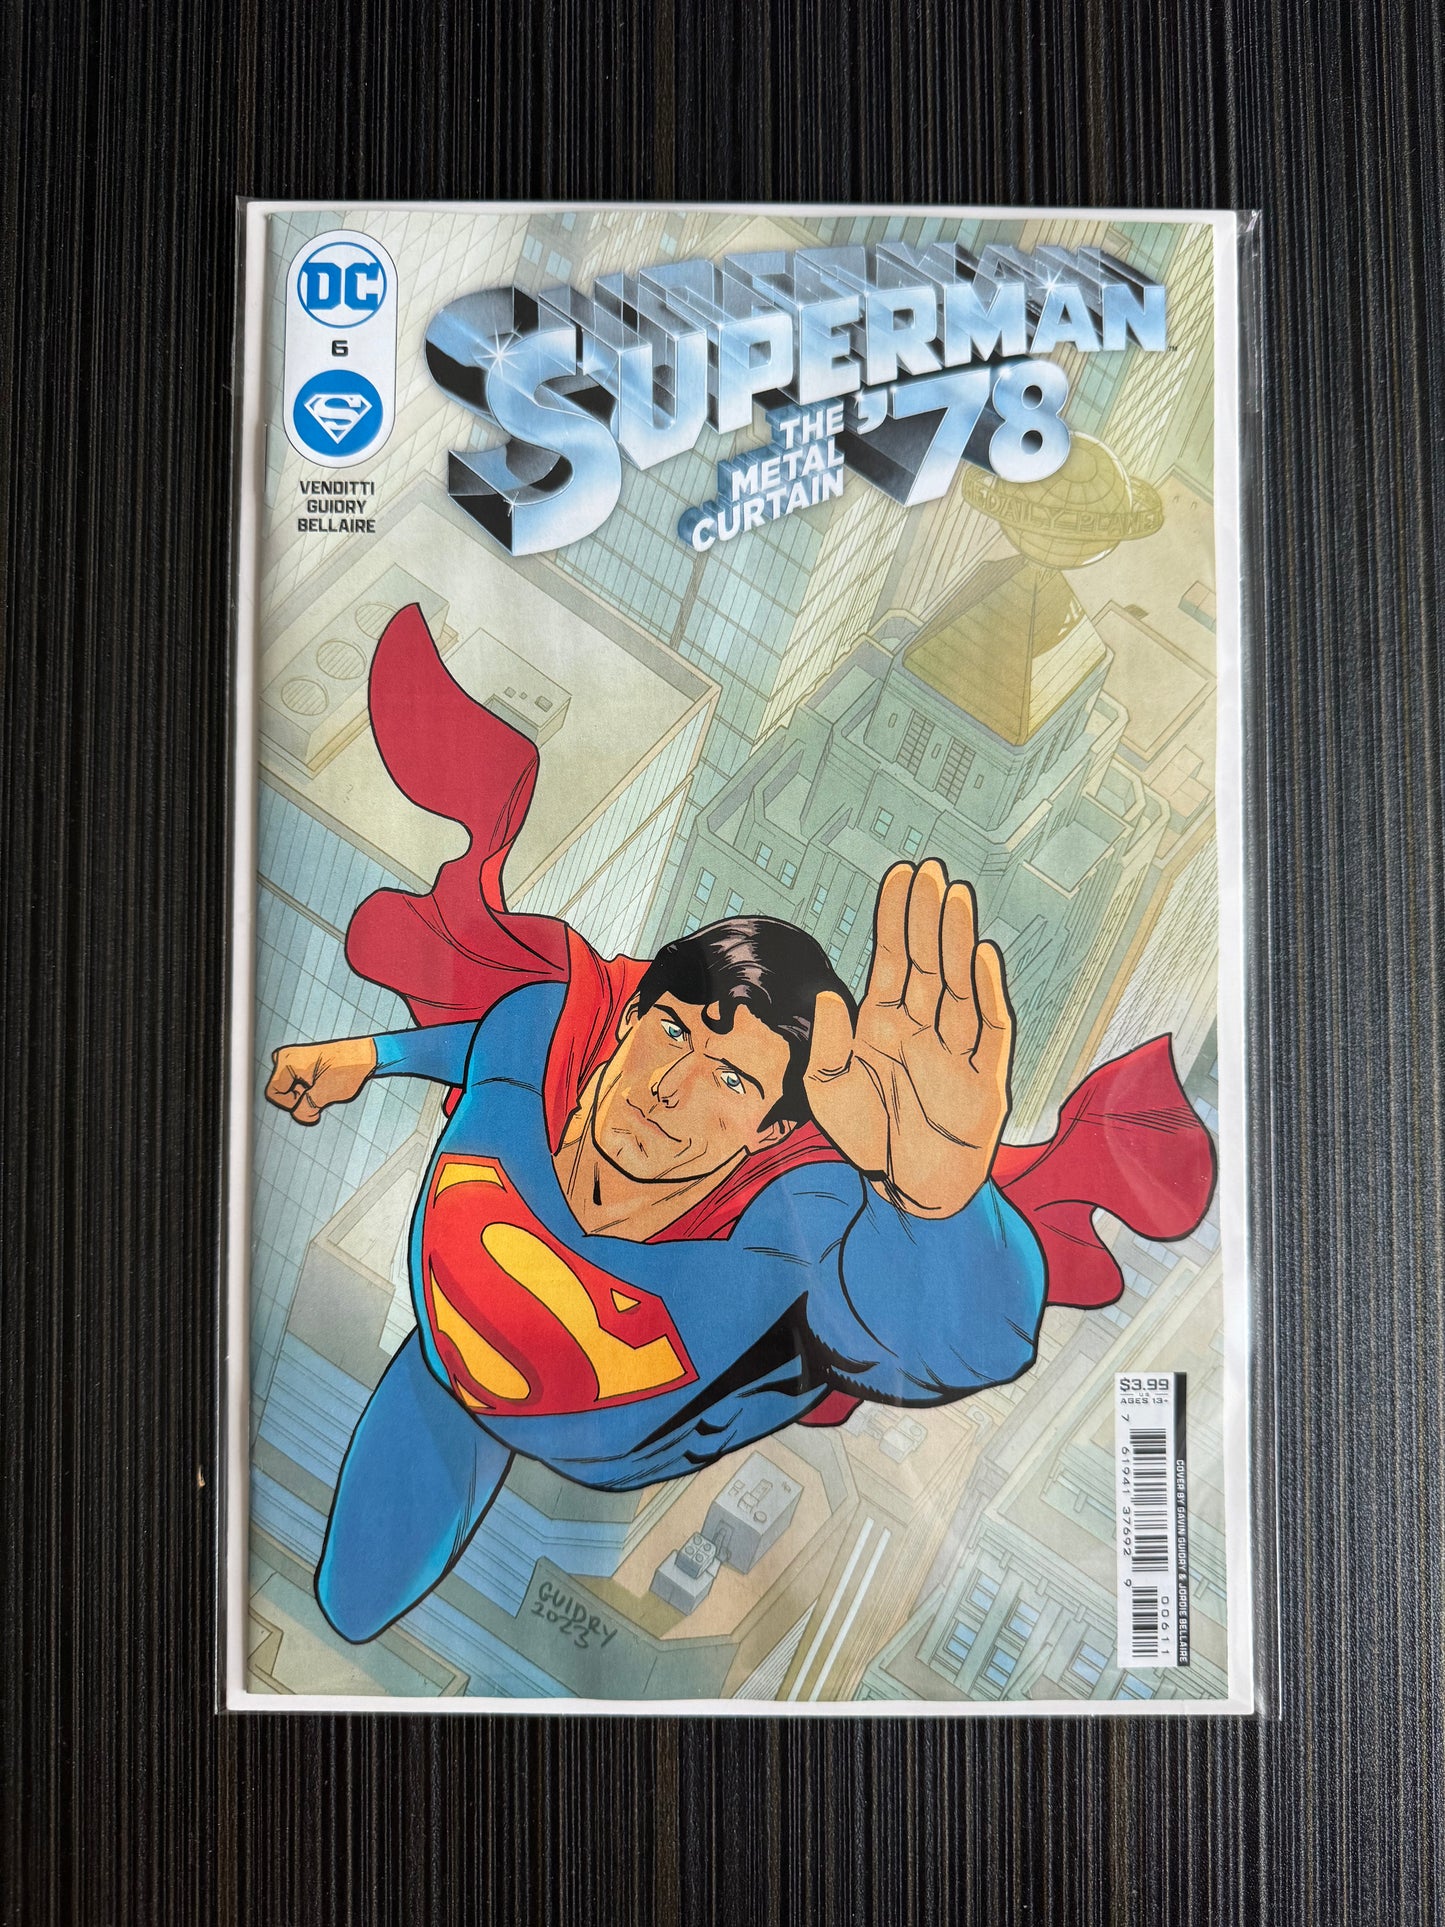 Superman 78 The Metal Curtain #6 (of 6) Cover A Gavin Guidry